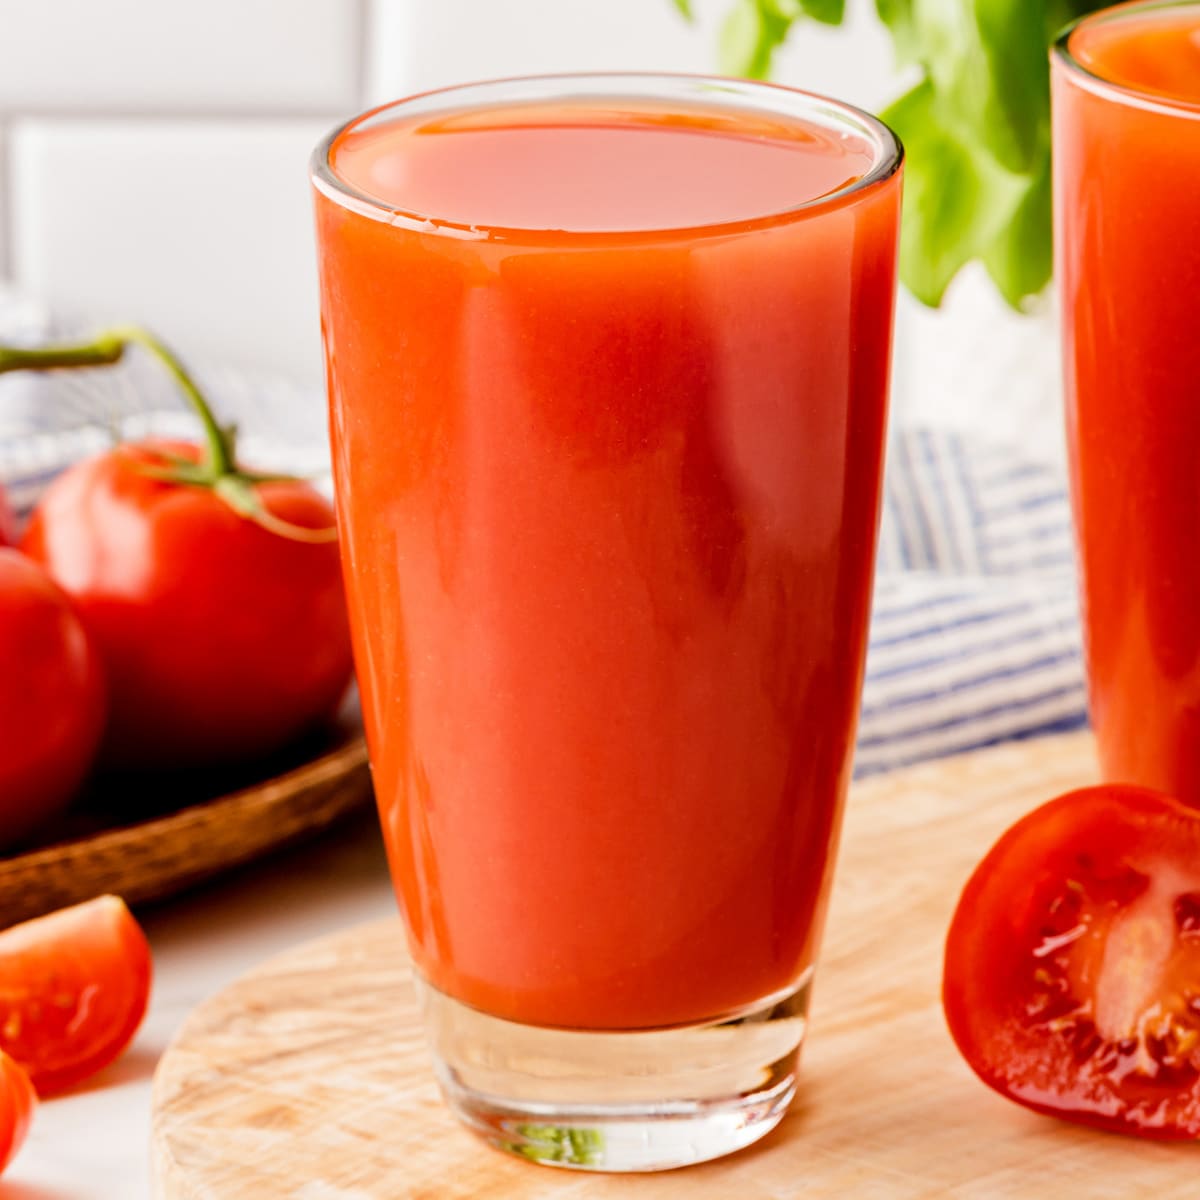 Full glasses of tomato juice with tomatoes around and in the background. 